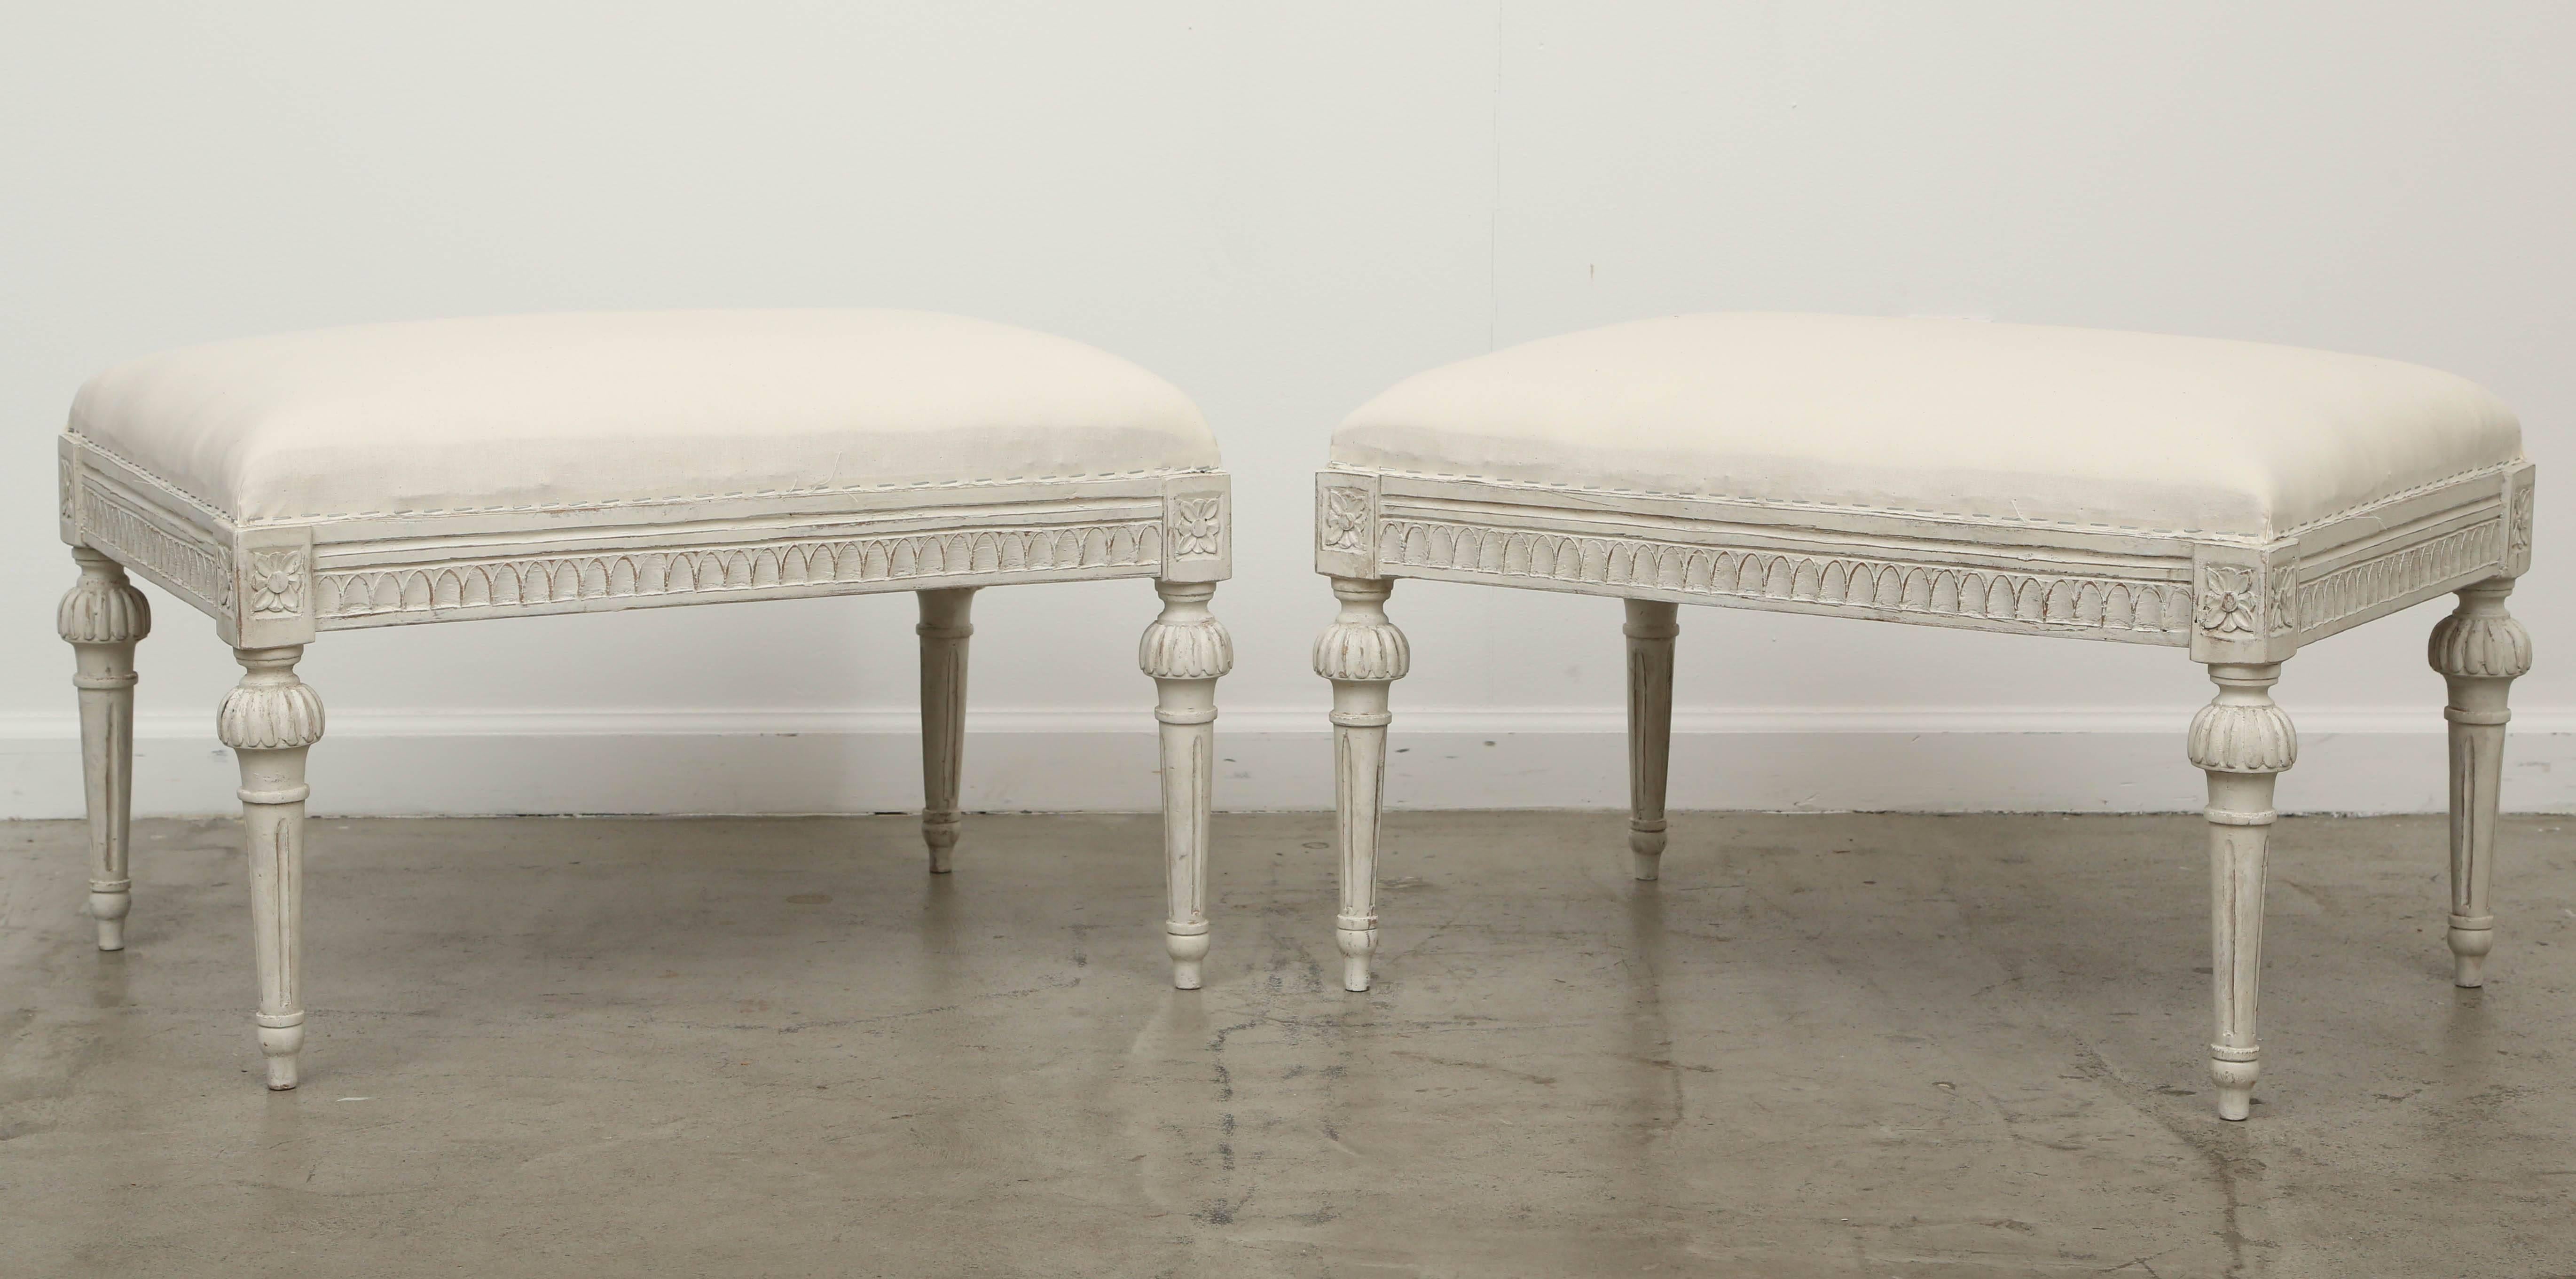 One Swedish painted Gustavian bench, late 19th century.
Bench is a larger scale, with carved lambs tongue border on apron, round tapered fluted legs with round ball fluted cap on top of legs, carved rosettes top of each leg, painted in white- grey